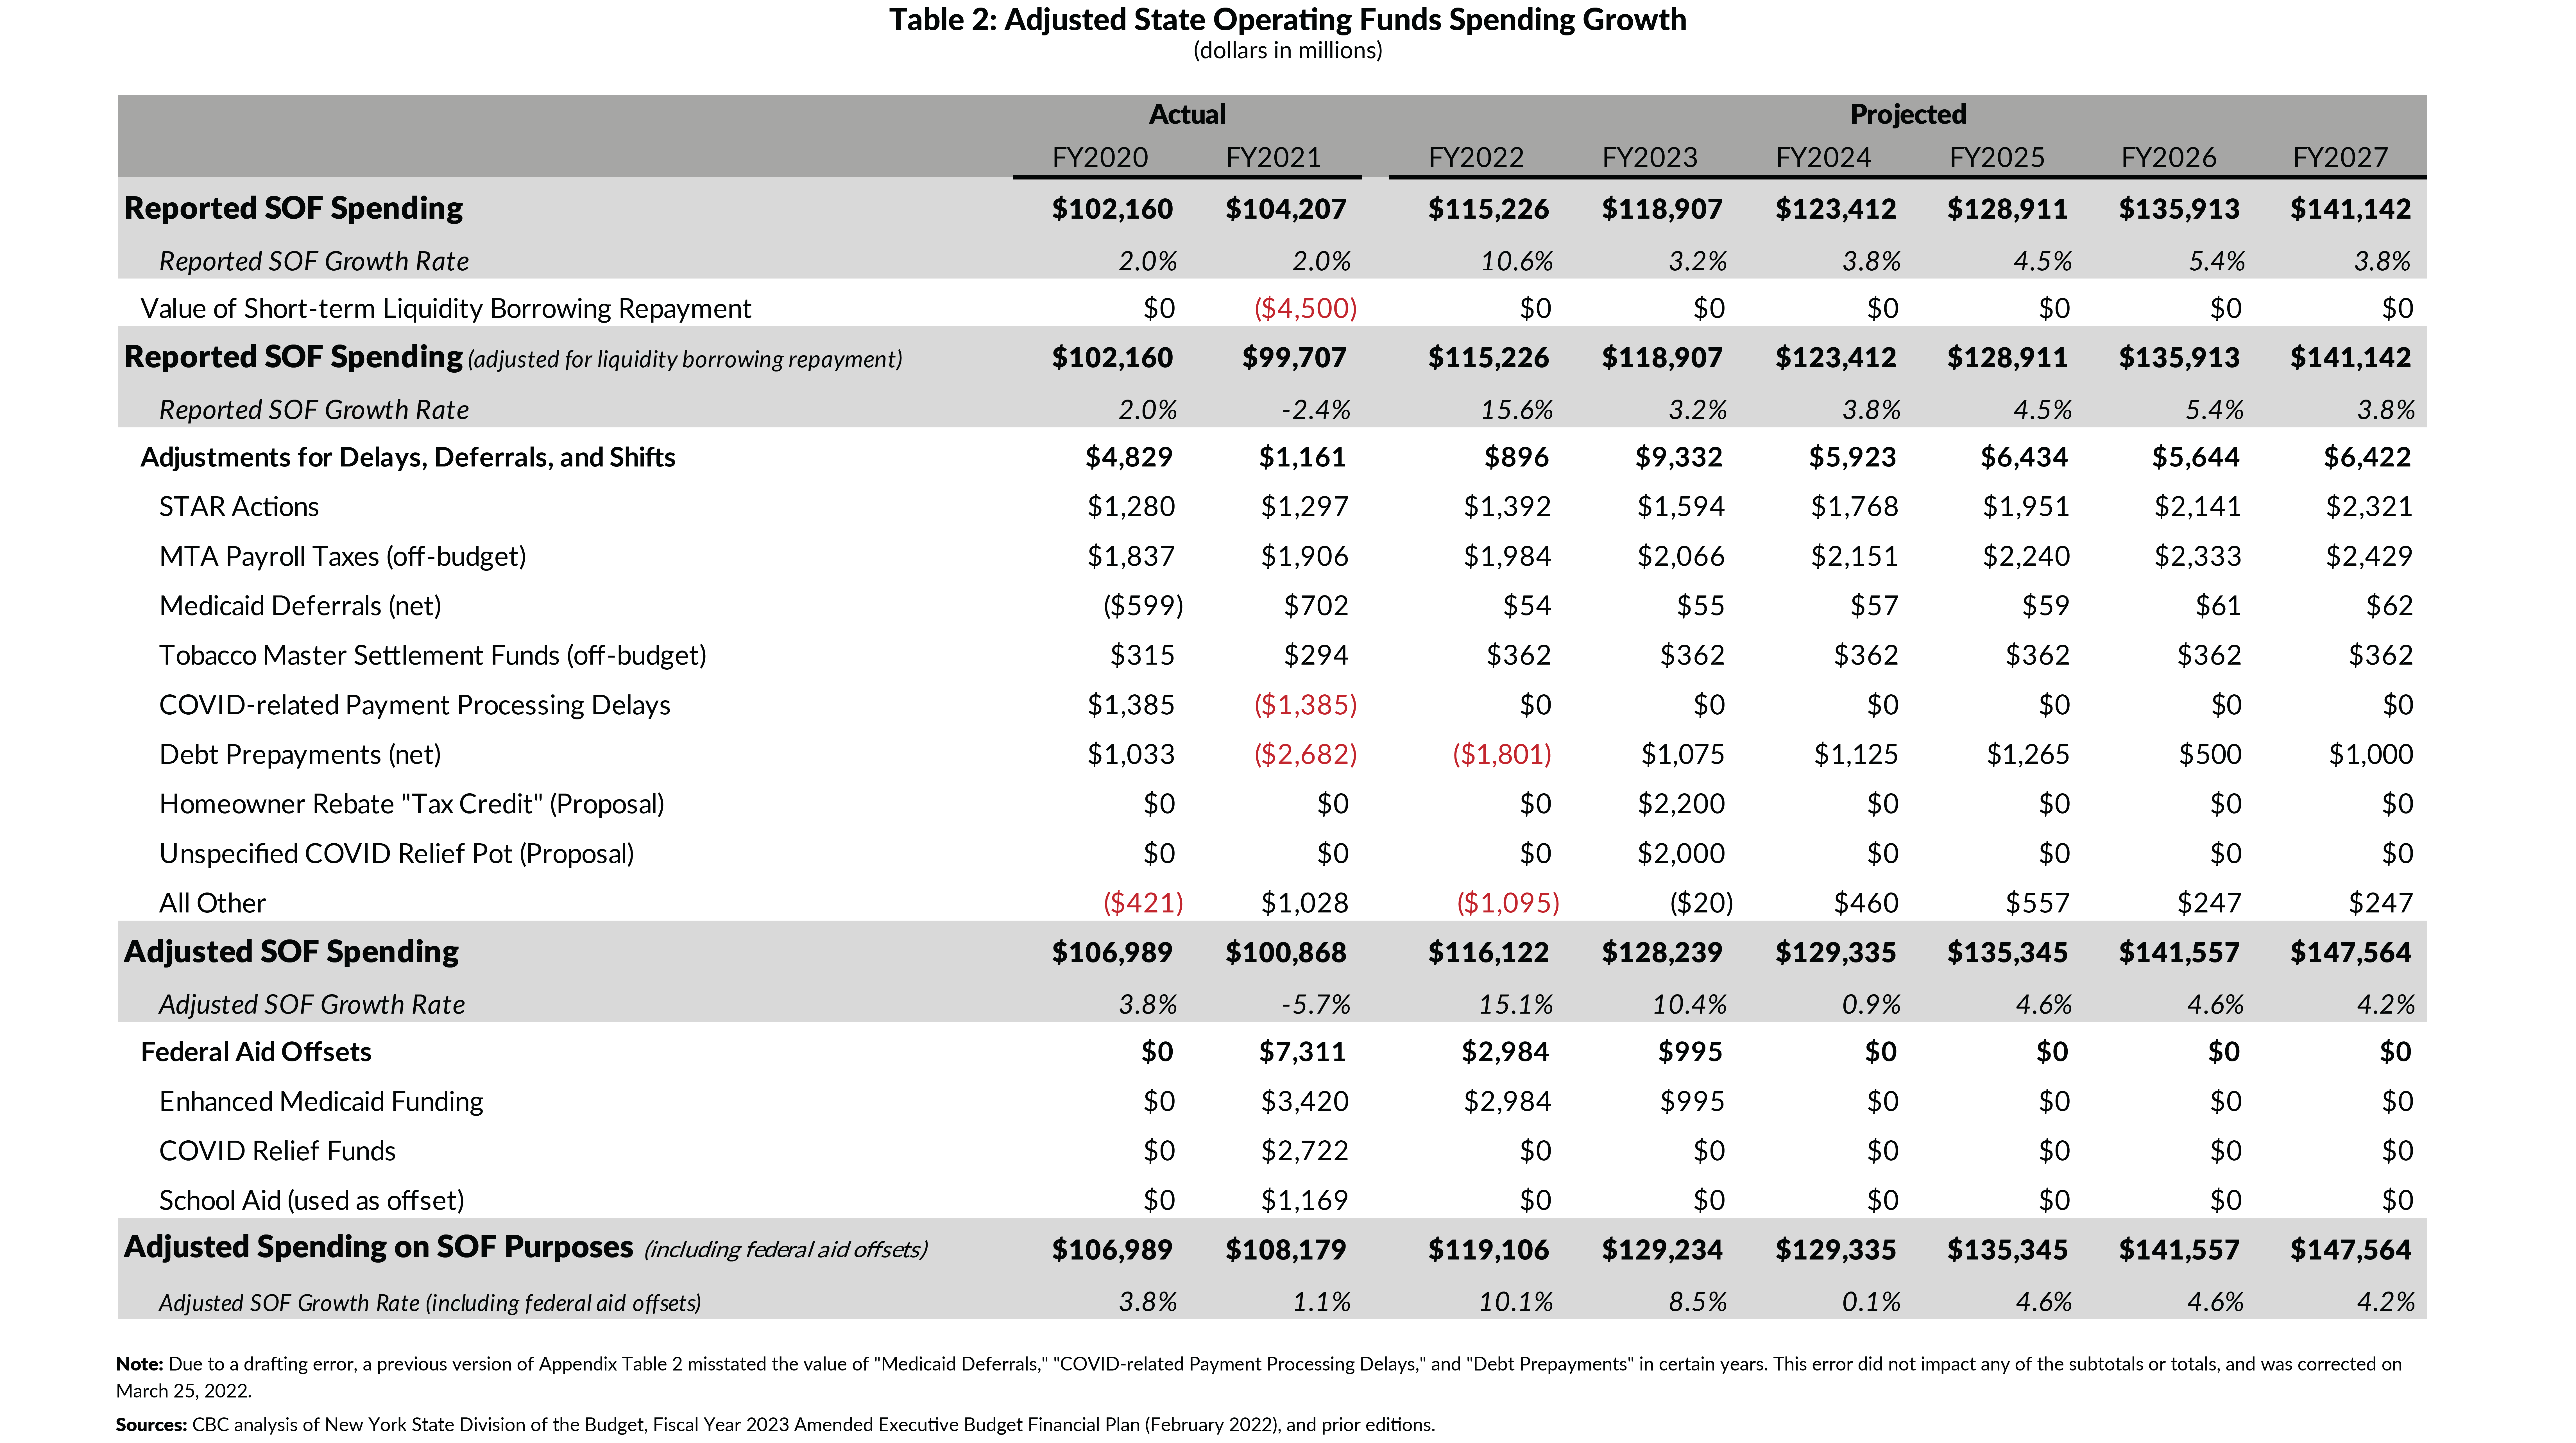 Appendix 2: Calculating Adjusted State Operating Funds Disbursements